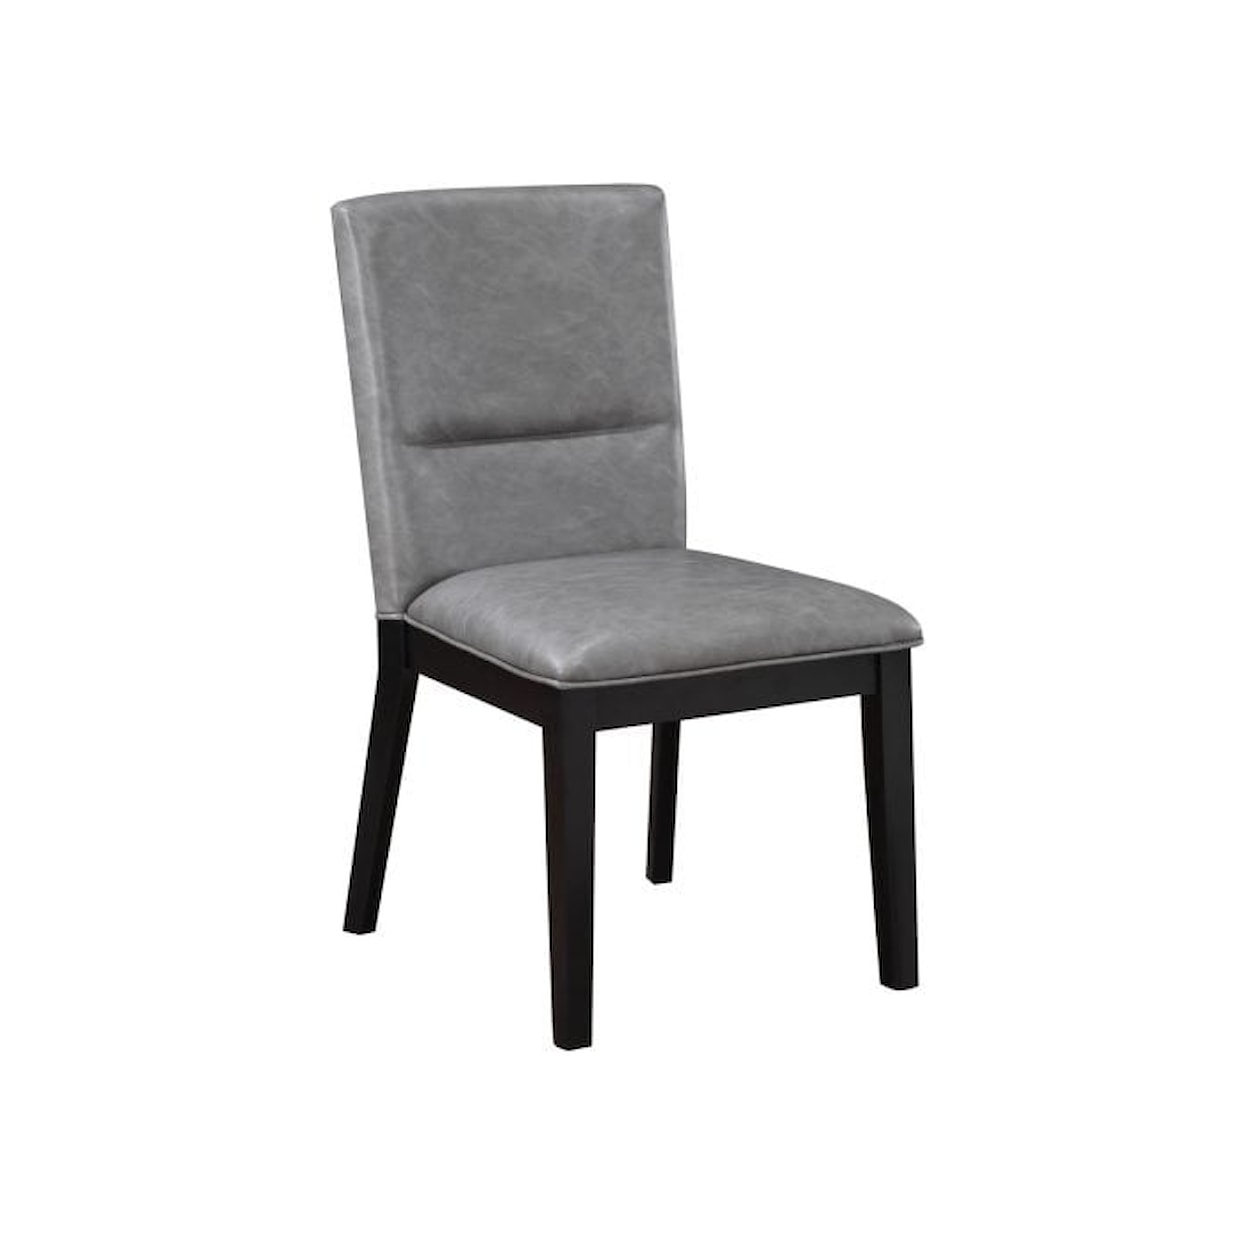 Prime Amy Amy Side Chair